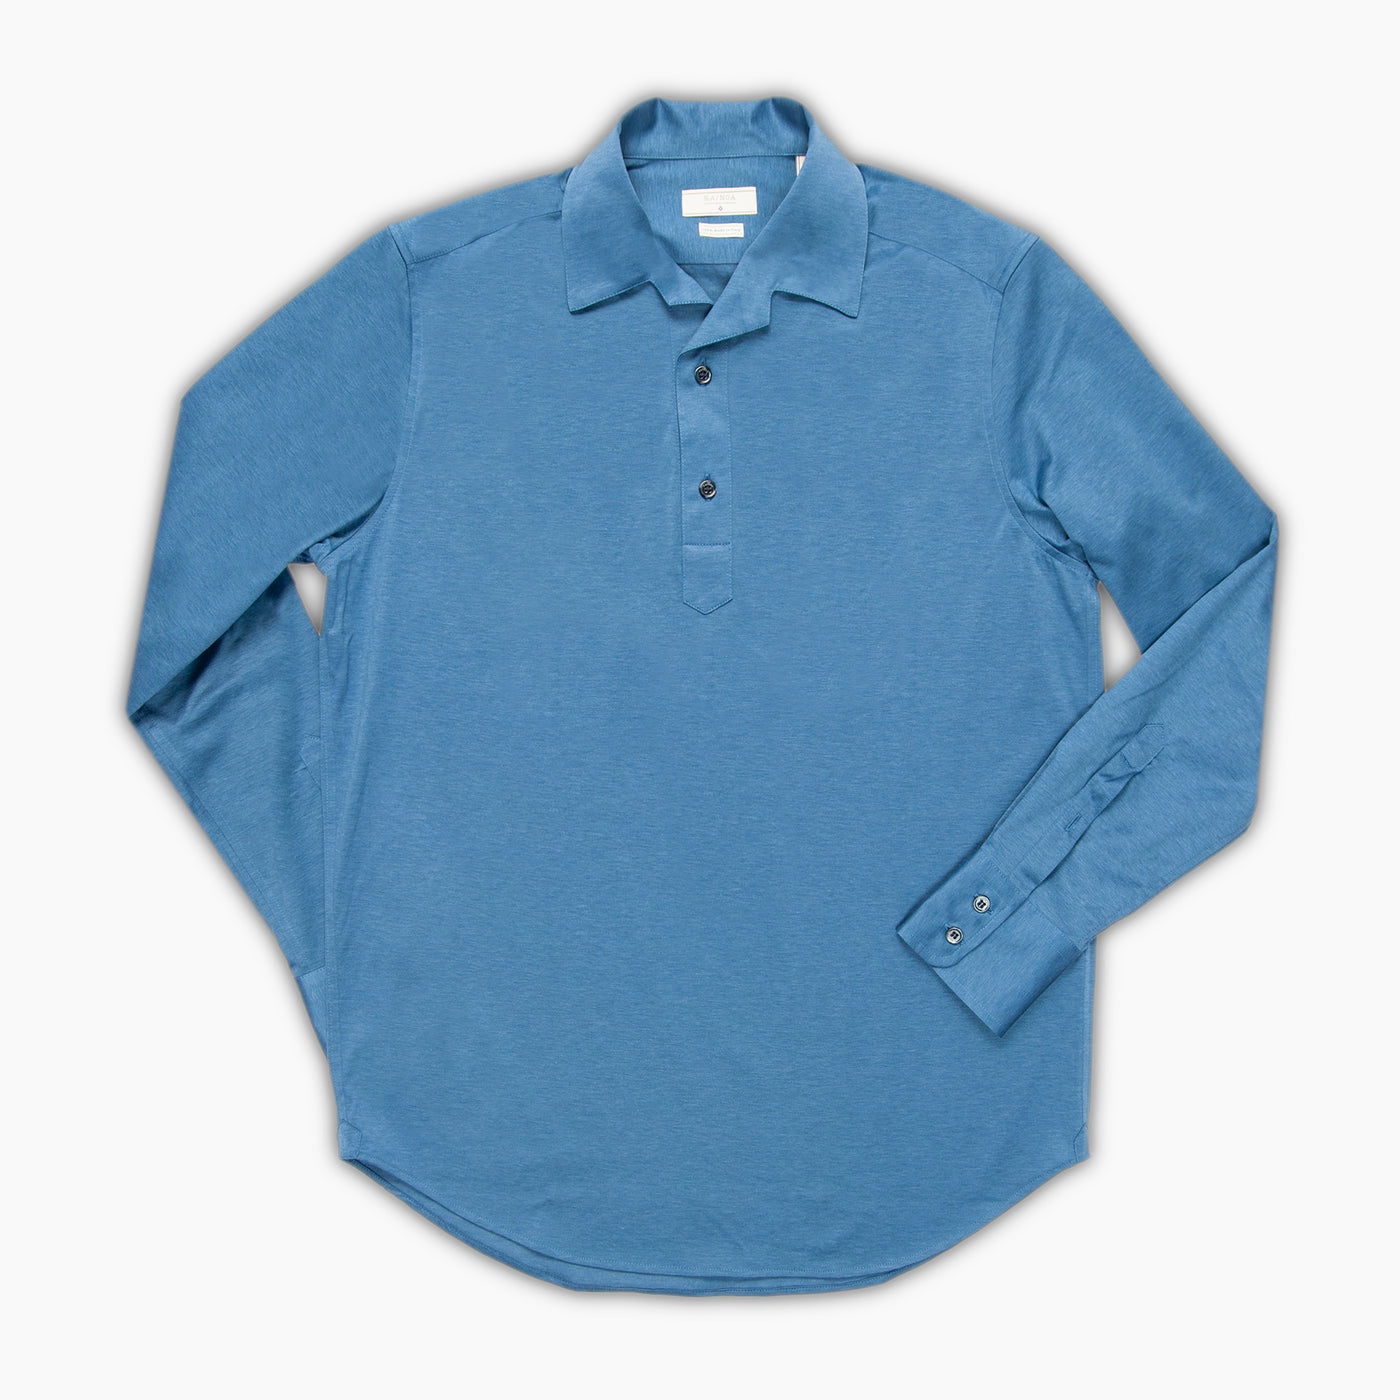 Baron shirt with polo collar in Light Jersey